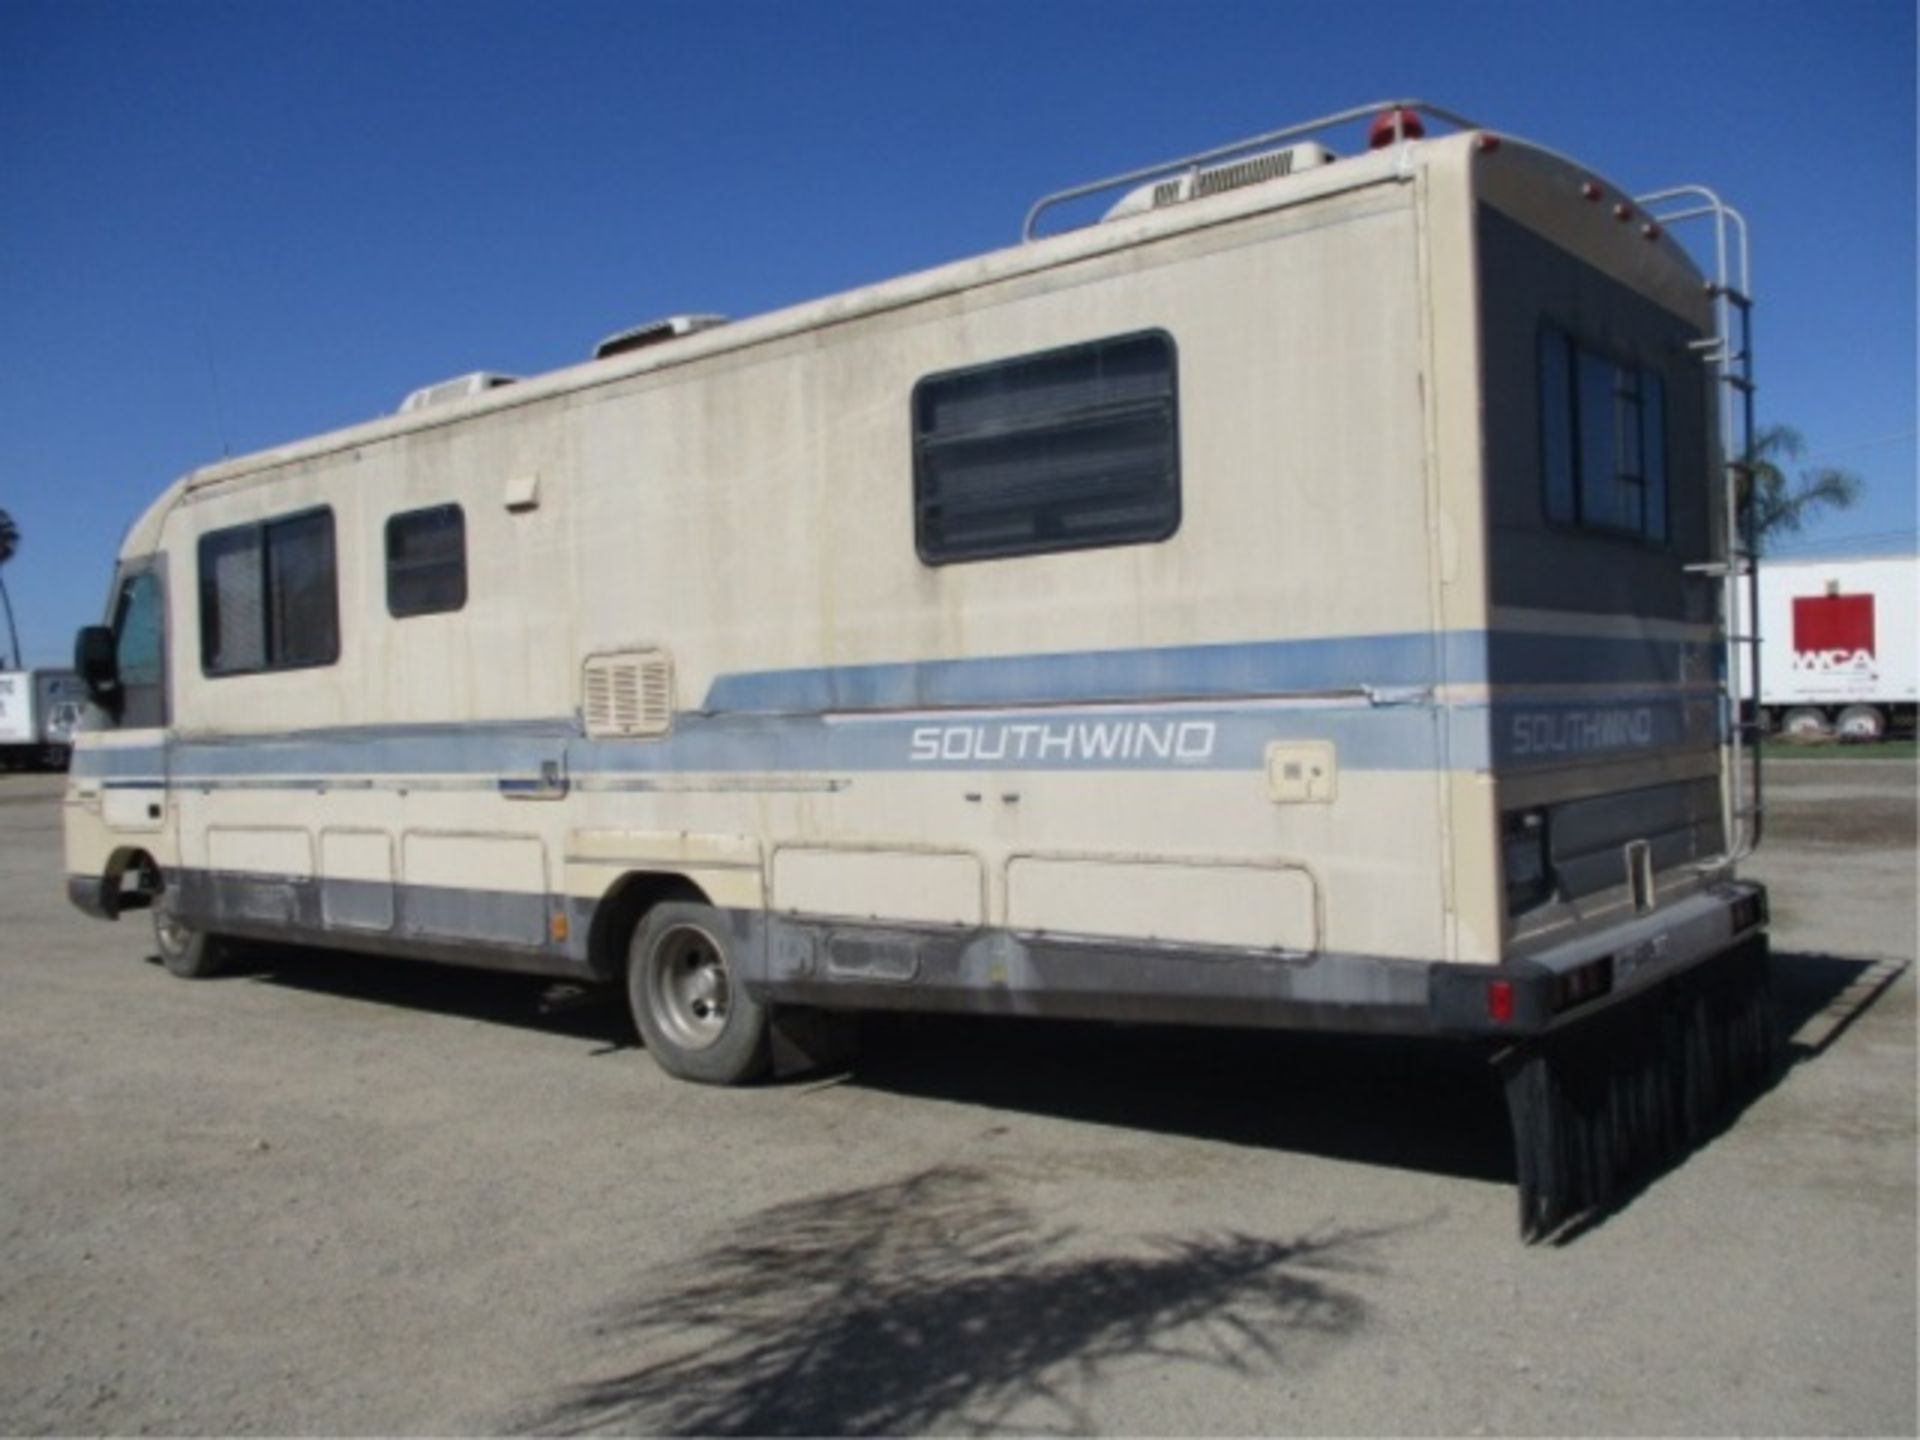 Fleetwood Southwind Motor Home, V8 Gas, Automatic, Refrigerator, Microwave, Stove, Bathroom W/ - Image 20 of 121